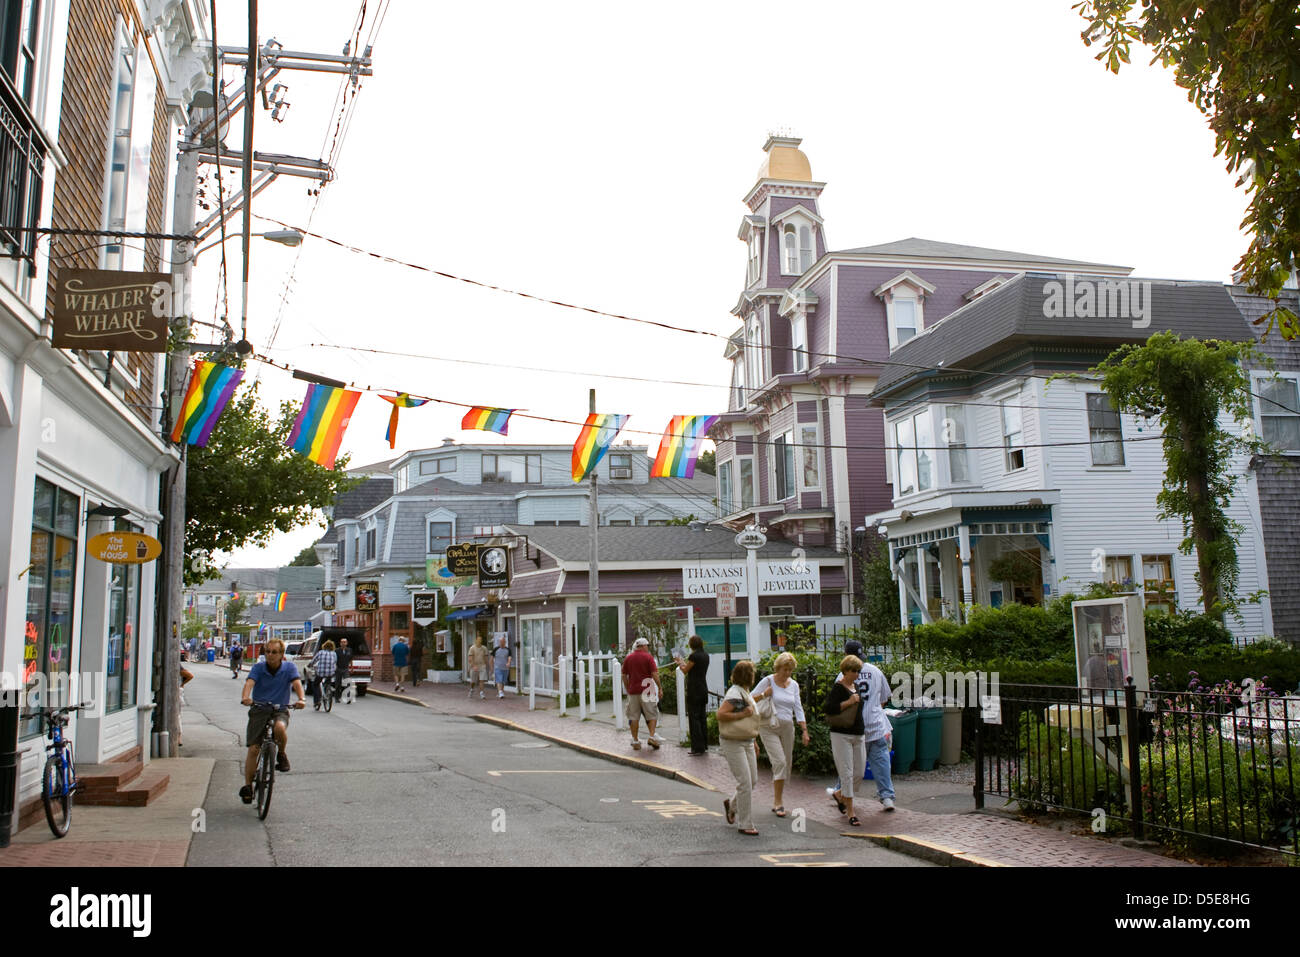 A street view in Provincetown showing the shops and houses Stock Photo